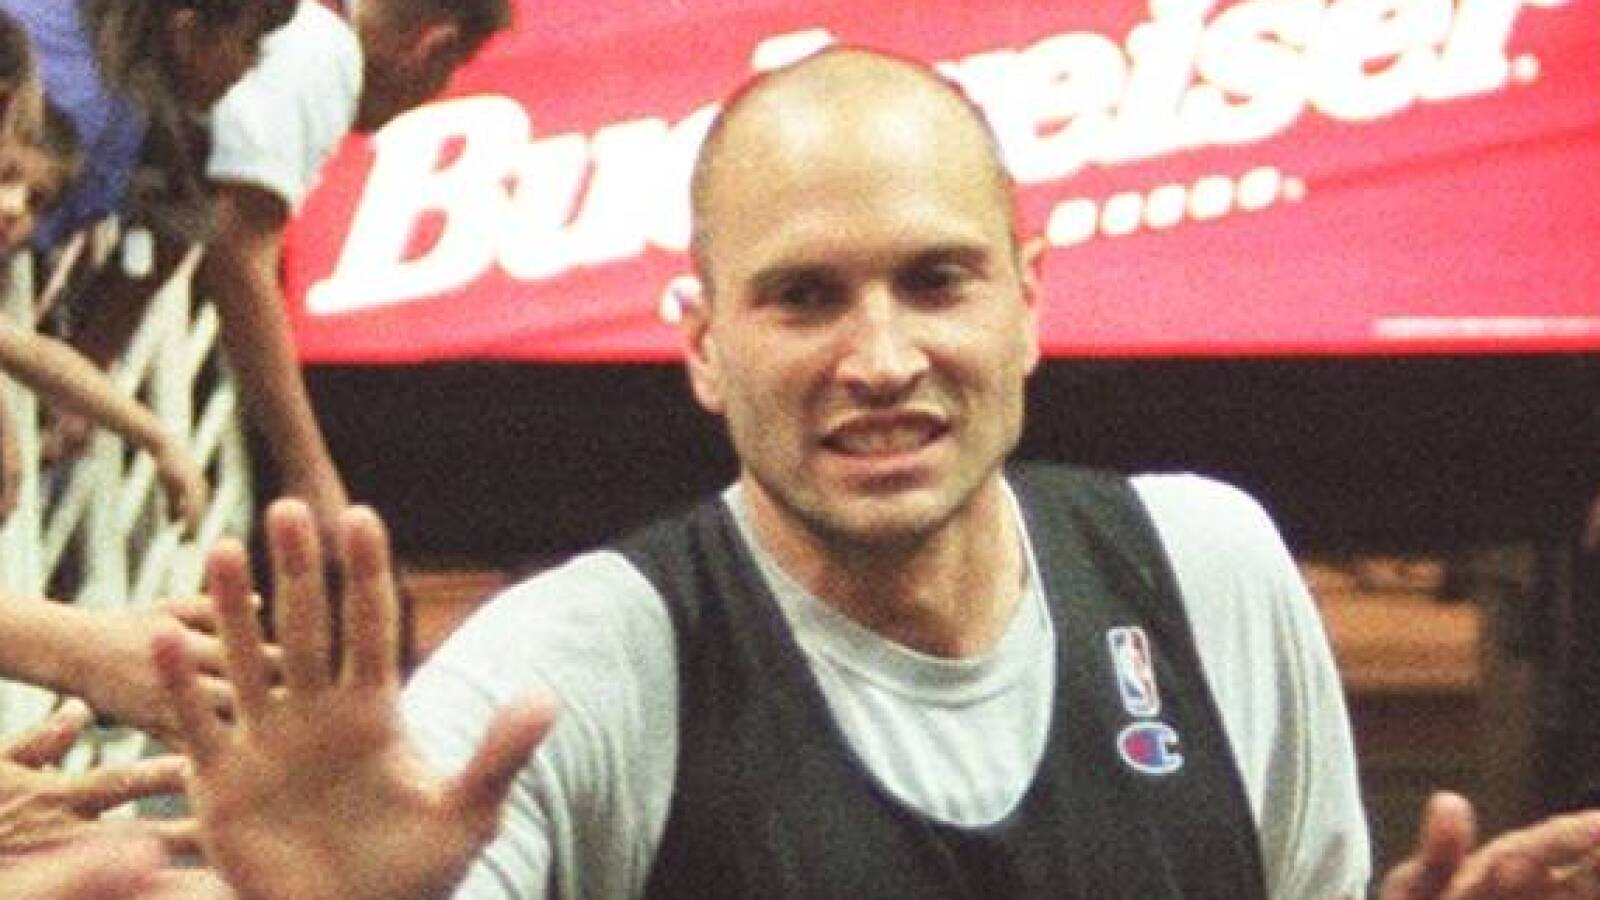 Rex Chapman shares great college story about Stephen Curry